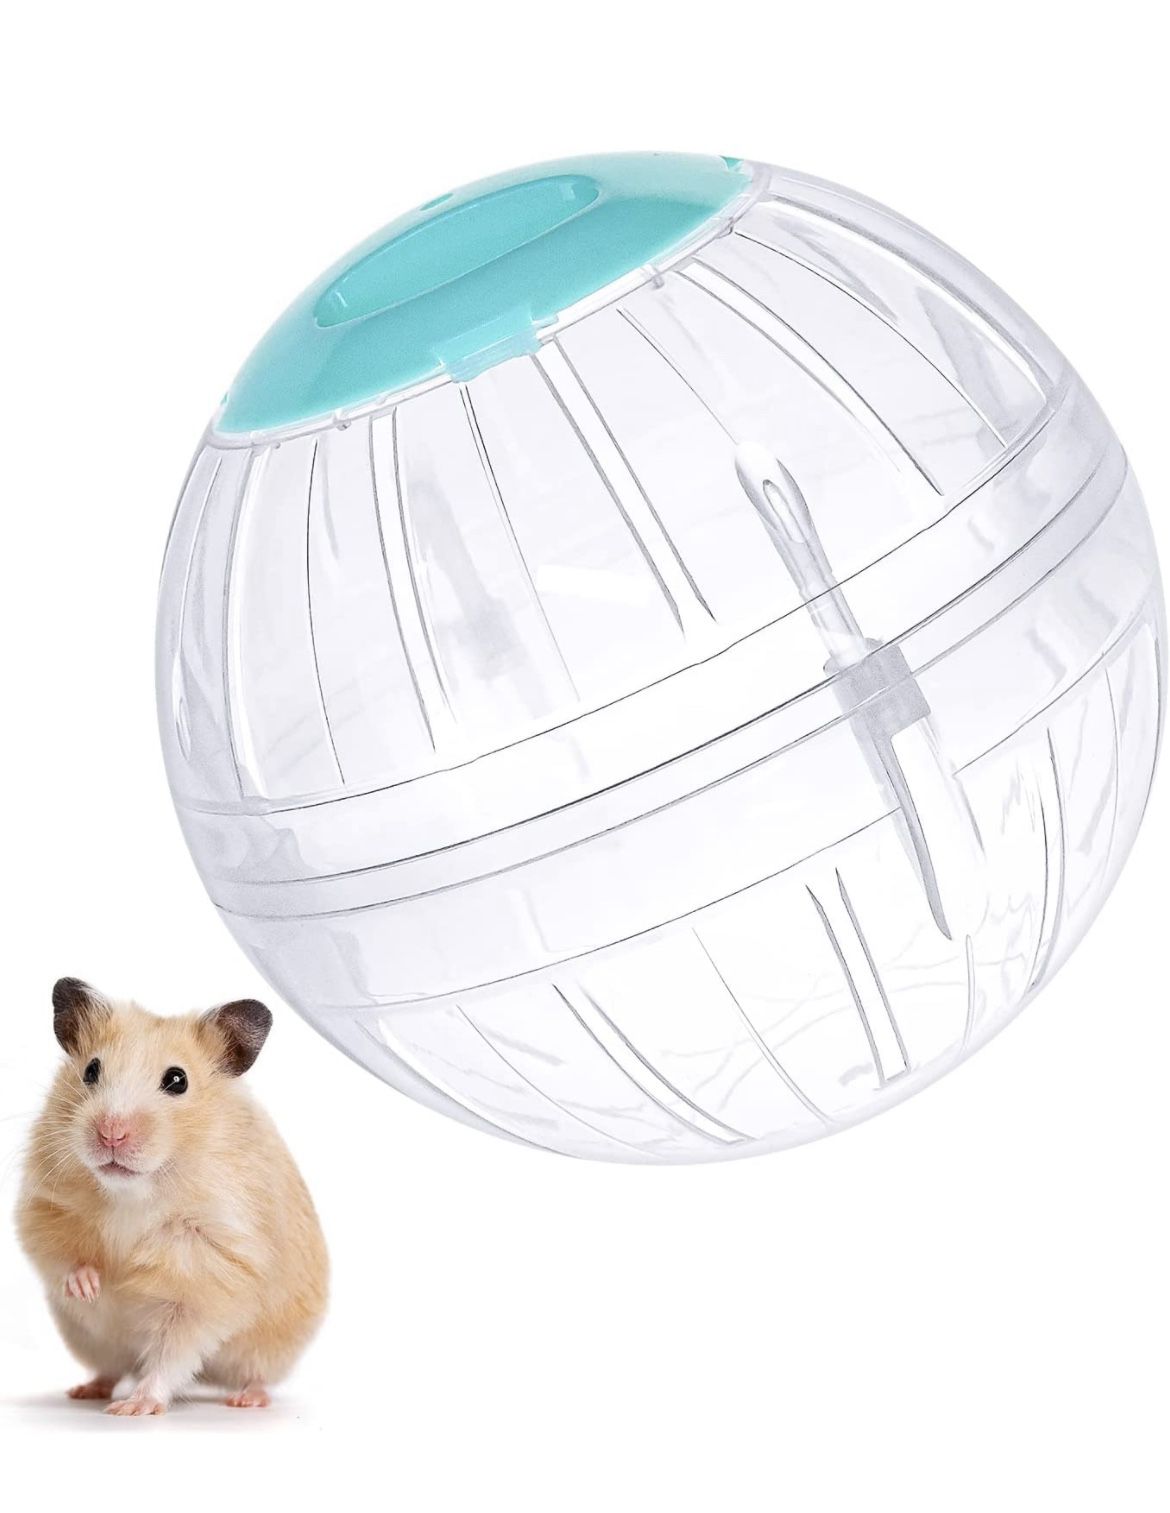 Hamster Exercise Ball, 5.7 Inch Transparent Hamster Ball Running Hamster Wheel for Dwarf Hamsters Small Pets to Reduce Boredom and Increase Activity